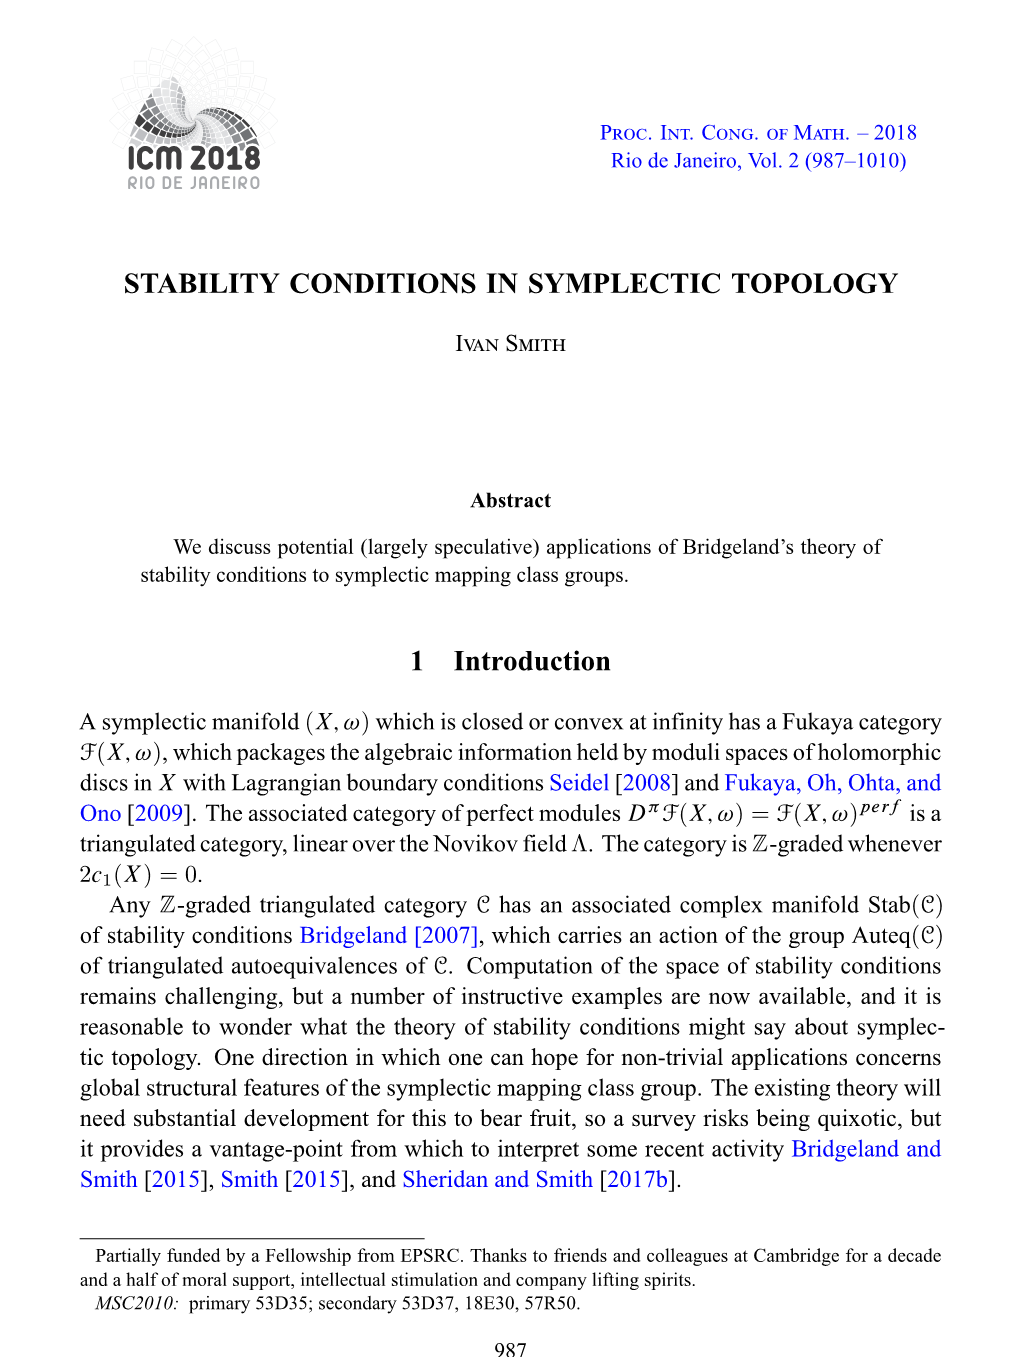 Stability Conditions in Symplectic Topology